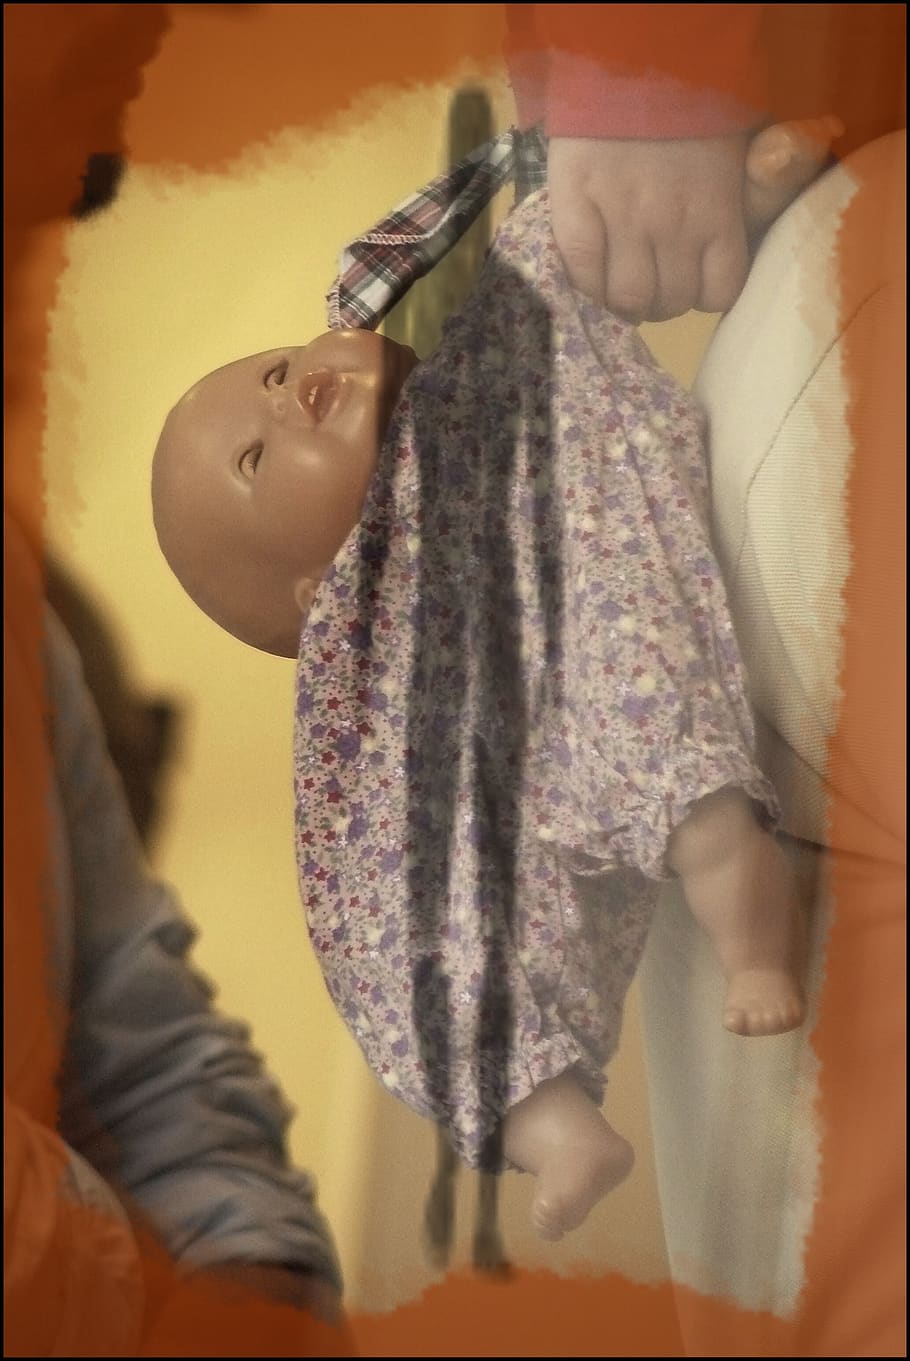 doll, toys, baby doll, black man, children in emergency, abuse, child's hand, child, hanging, hold tight